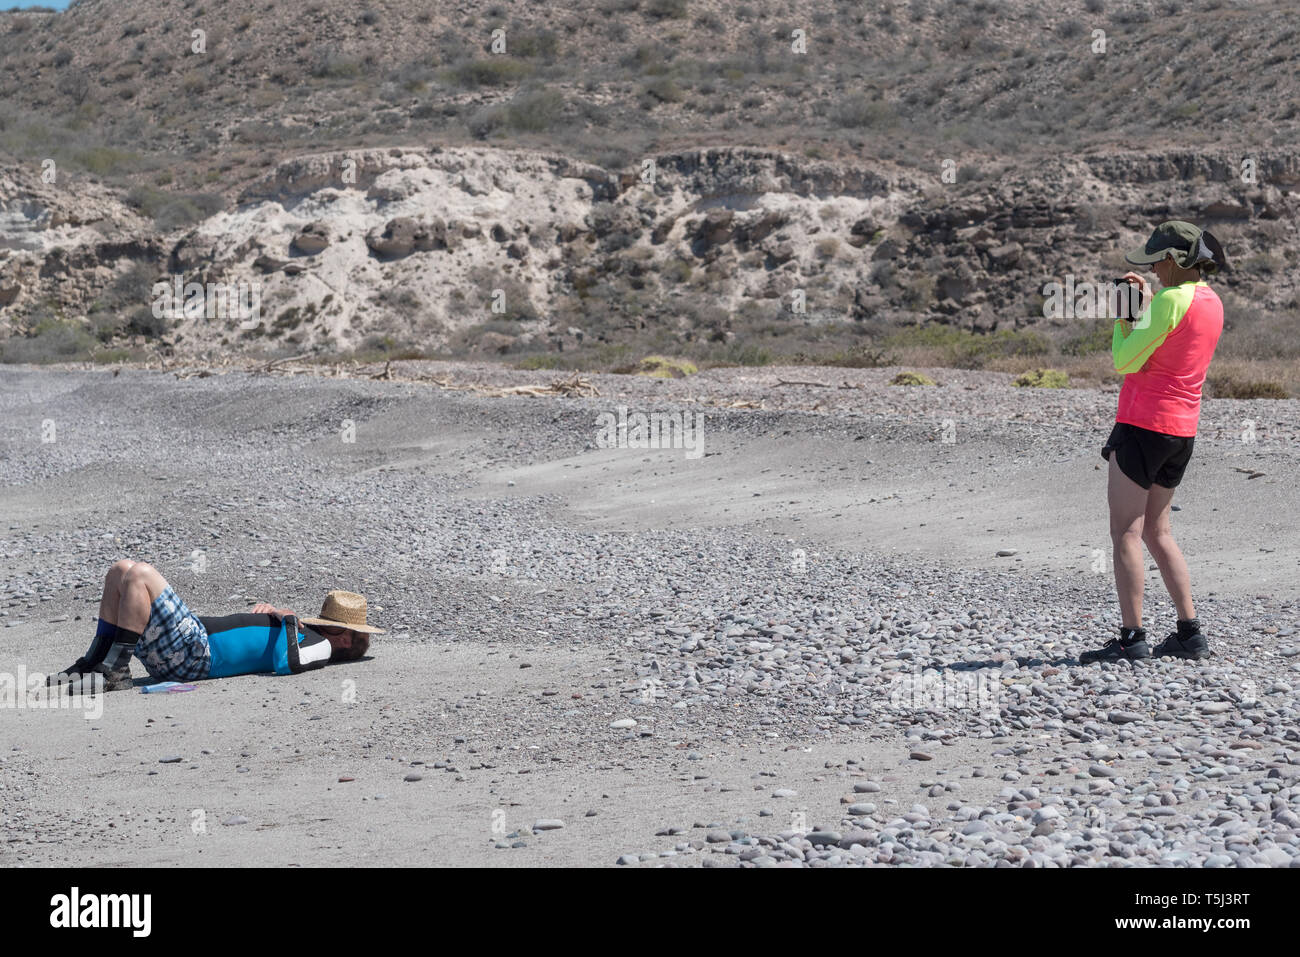 WIfe taking picture of napping husband, Bay of Loreto Nat. Park, Baja California Sur, Mexico. Stock Photo